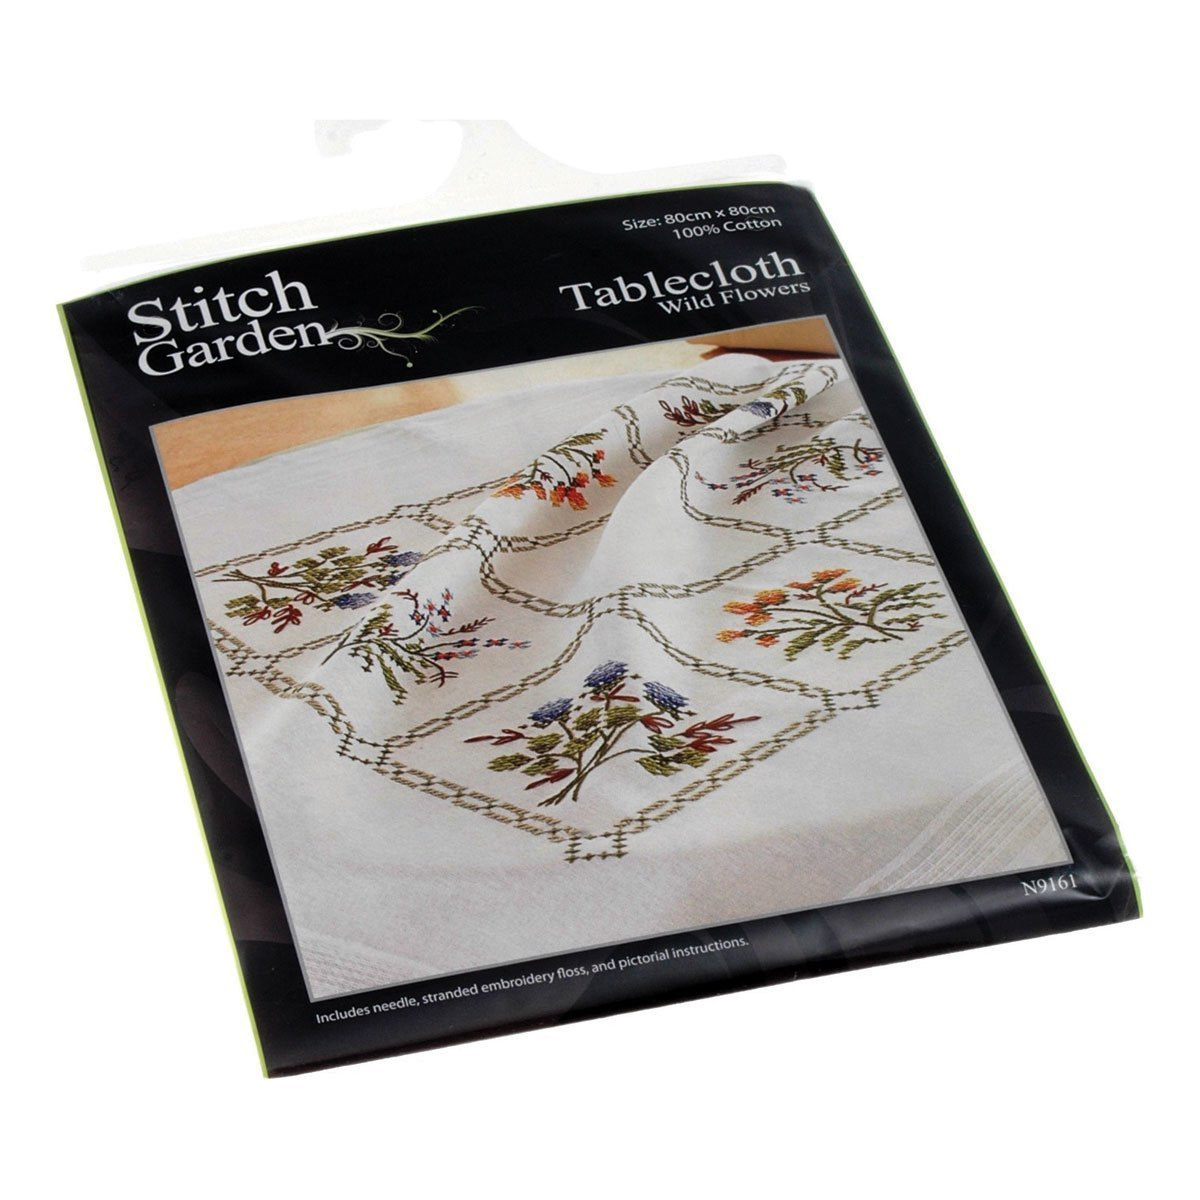 Tablecloth Hand Embroidery Patterns Hand Embroidery Kits Tablecloth Free Embroidery Patterns